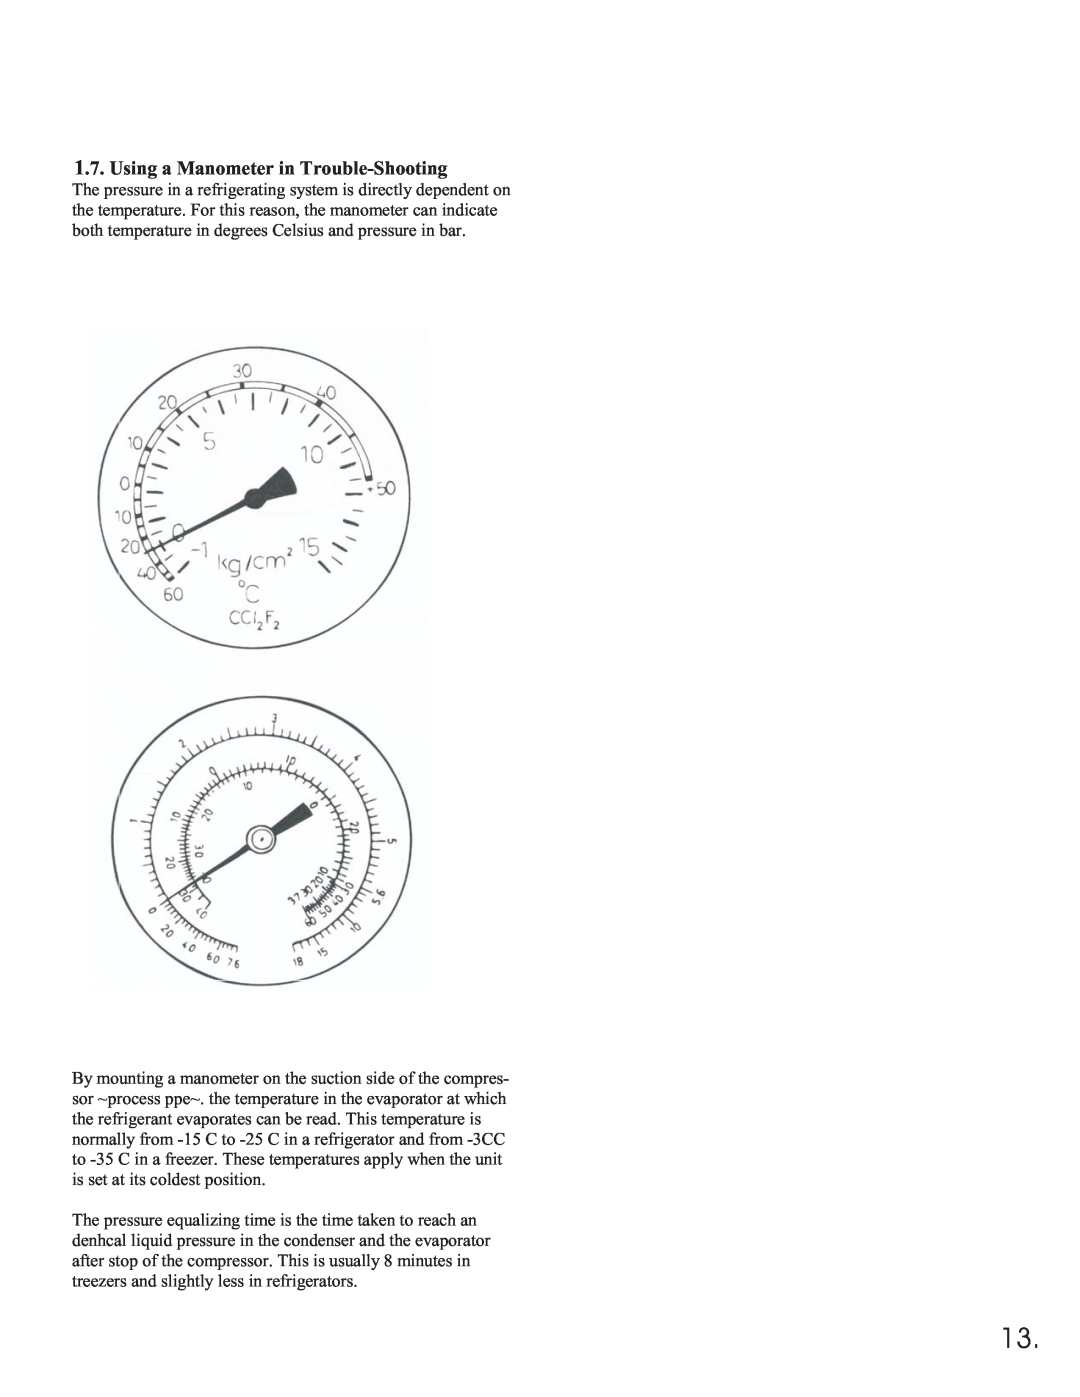 Equator 375 service manual Using a Manometer in Trouble-Shooting 